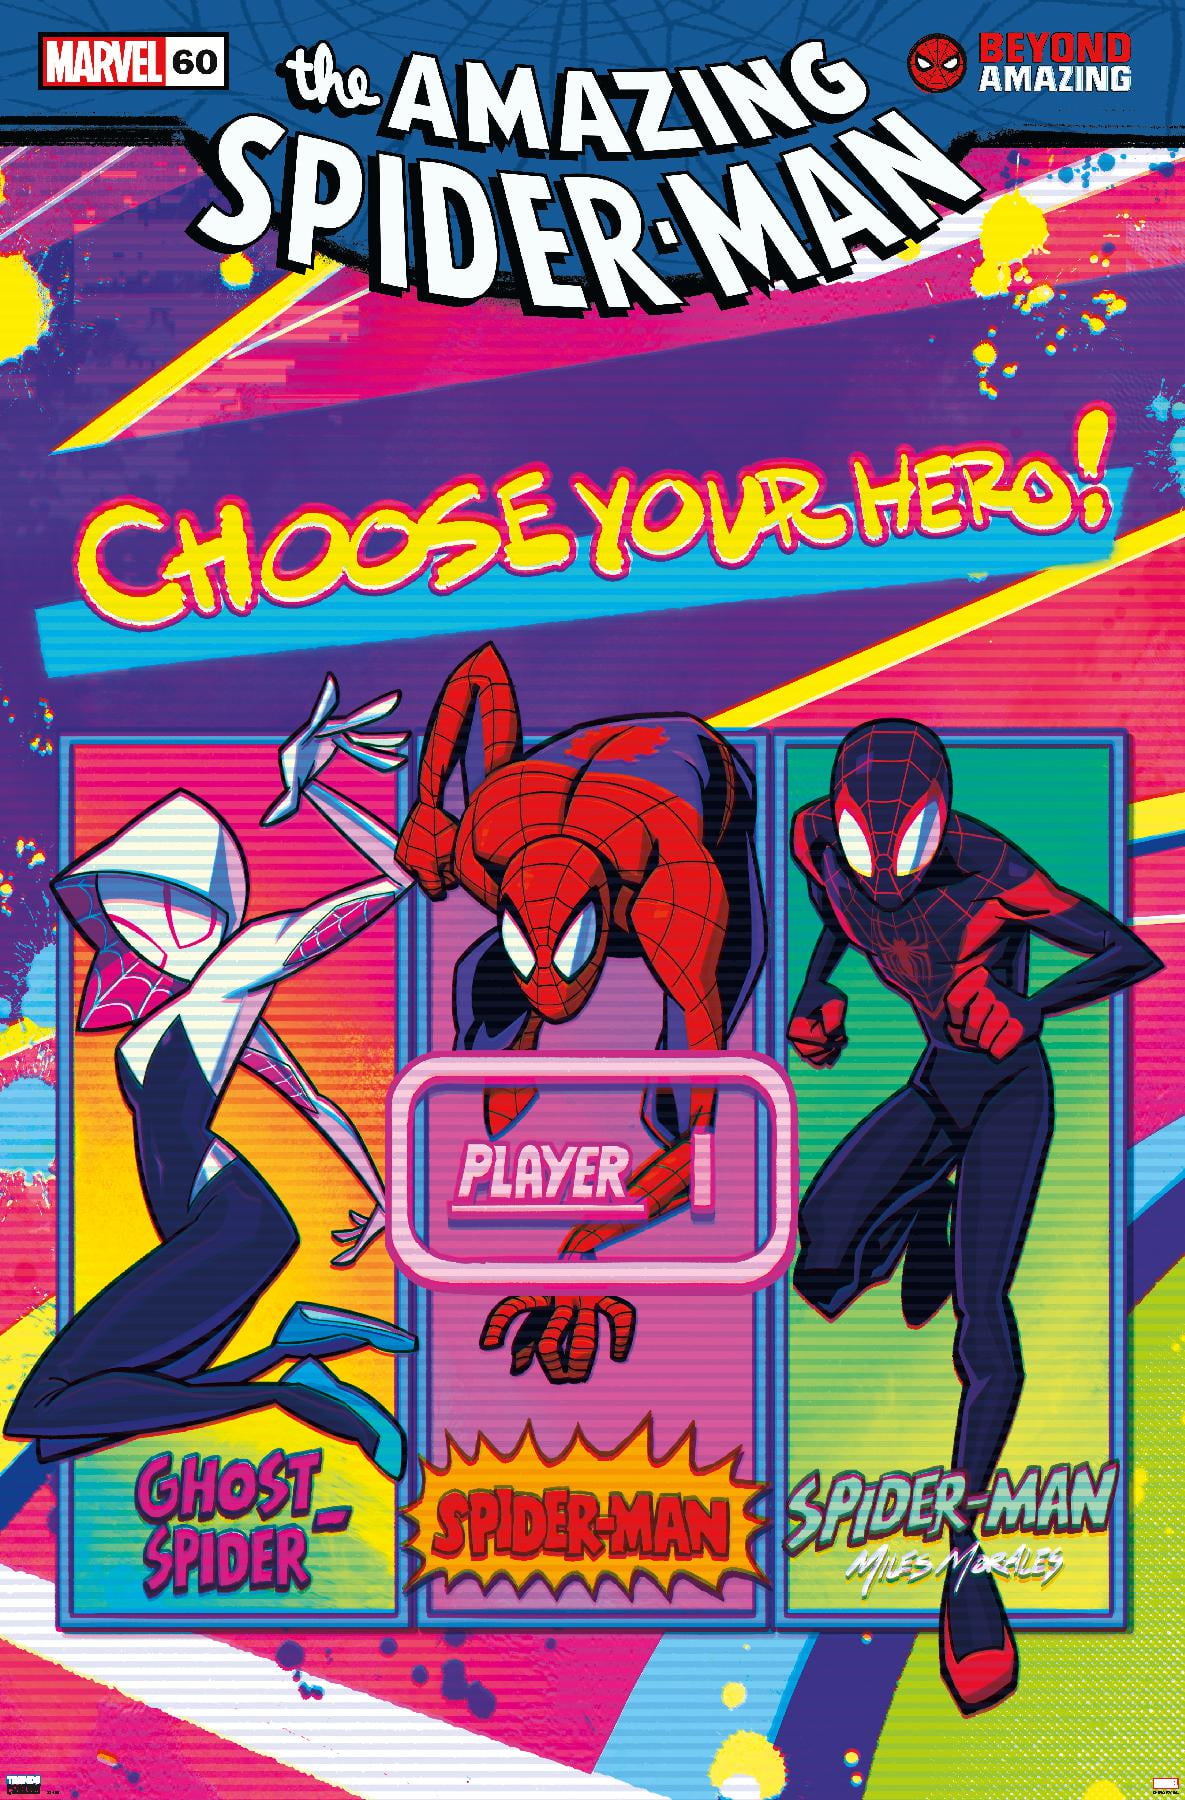  Trends International Marvel Spider-Man: Across The Spider-Verse  - Spider-Punk One Sheet Wall Poster, 22.37 x 34.00, Unframed Version:  Posters & Prints